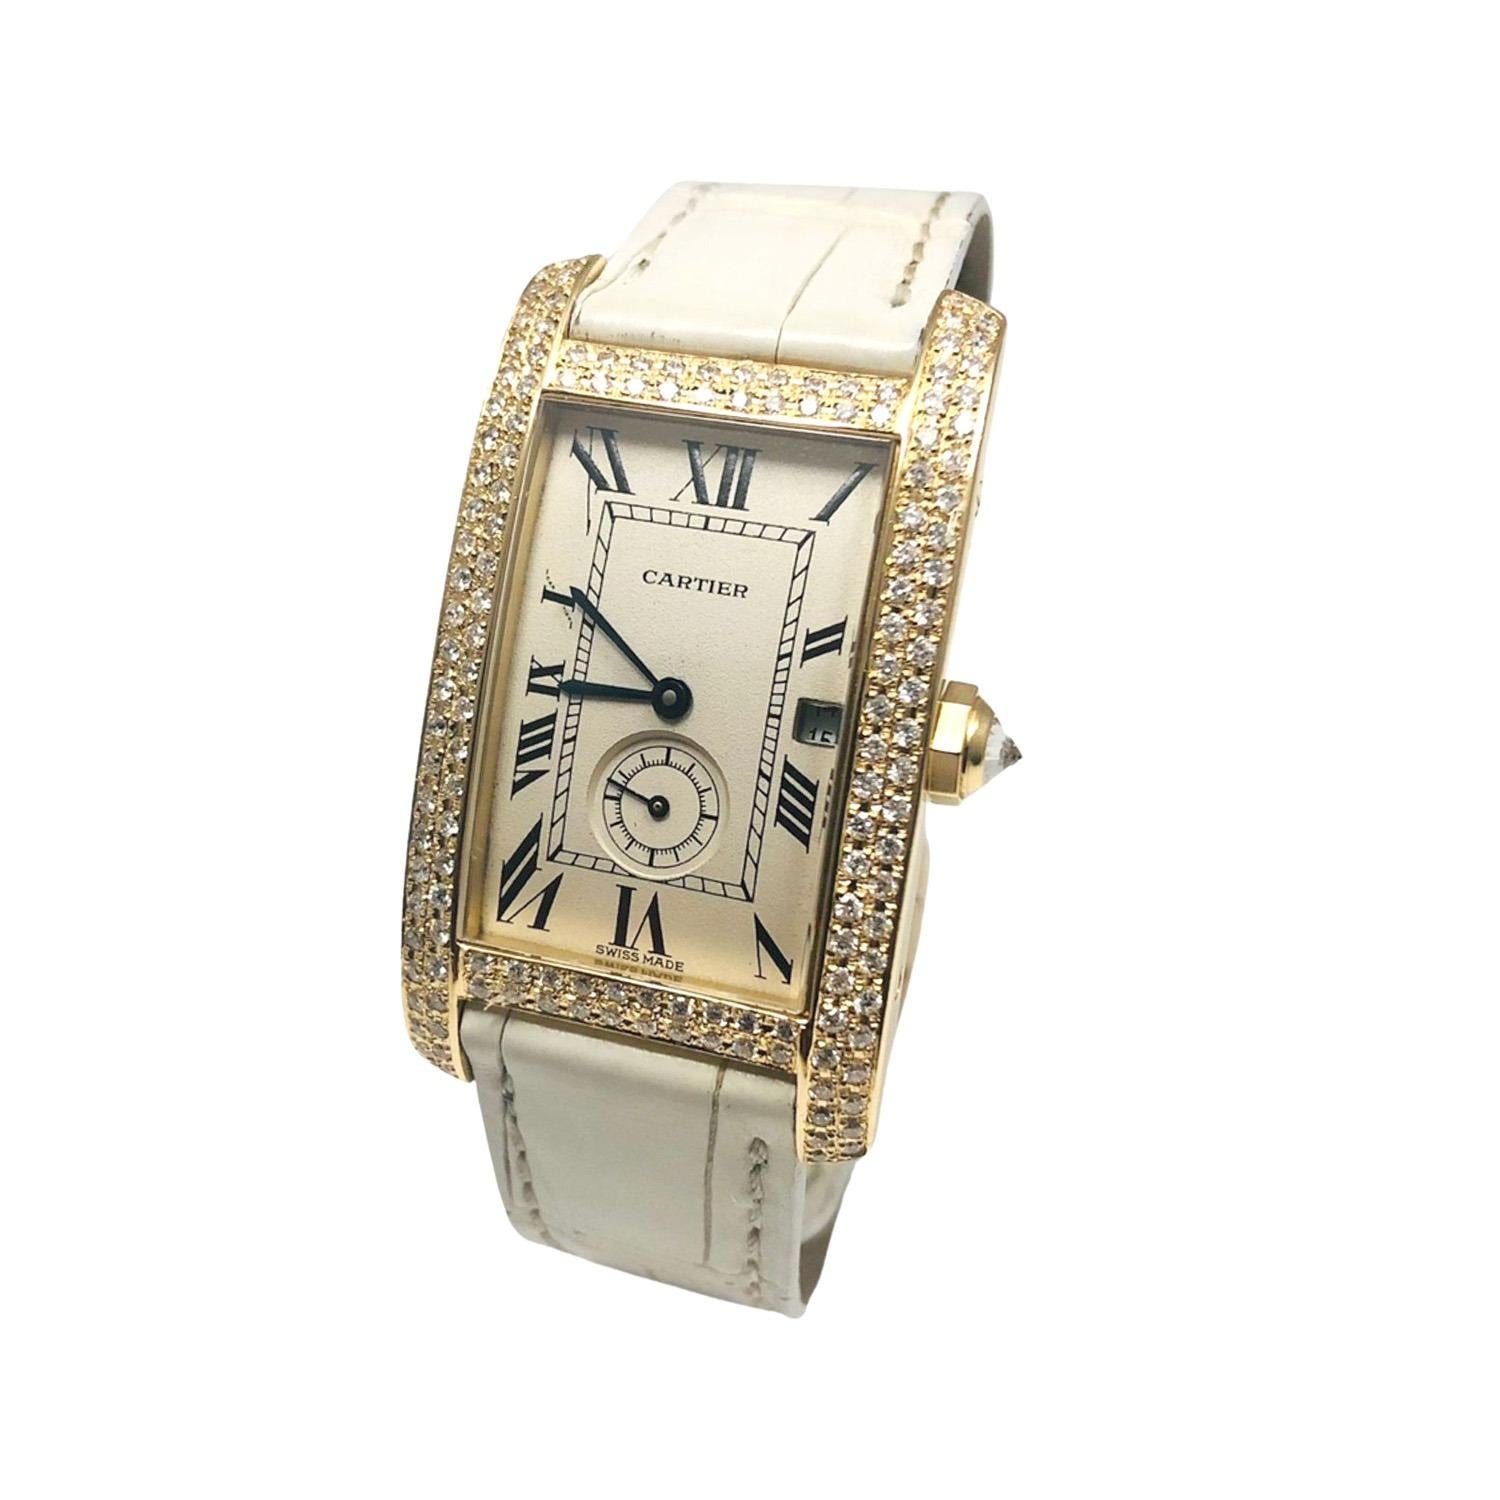 Brand: Cartier

Model Name: Tank Americaine

Model Number: 811905

Movement: Automatic

Case Size: 23 mm

Case Back: Closed

Case Material: Yellow Gold

Bezel: Yellow Gold/Diamonds

Dial: White

Bracelet: White Leather Strap

Hour Markers: Roman